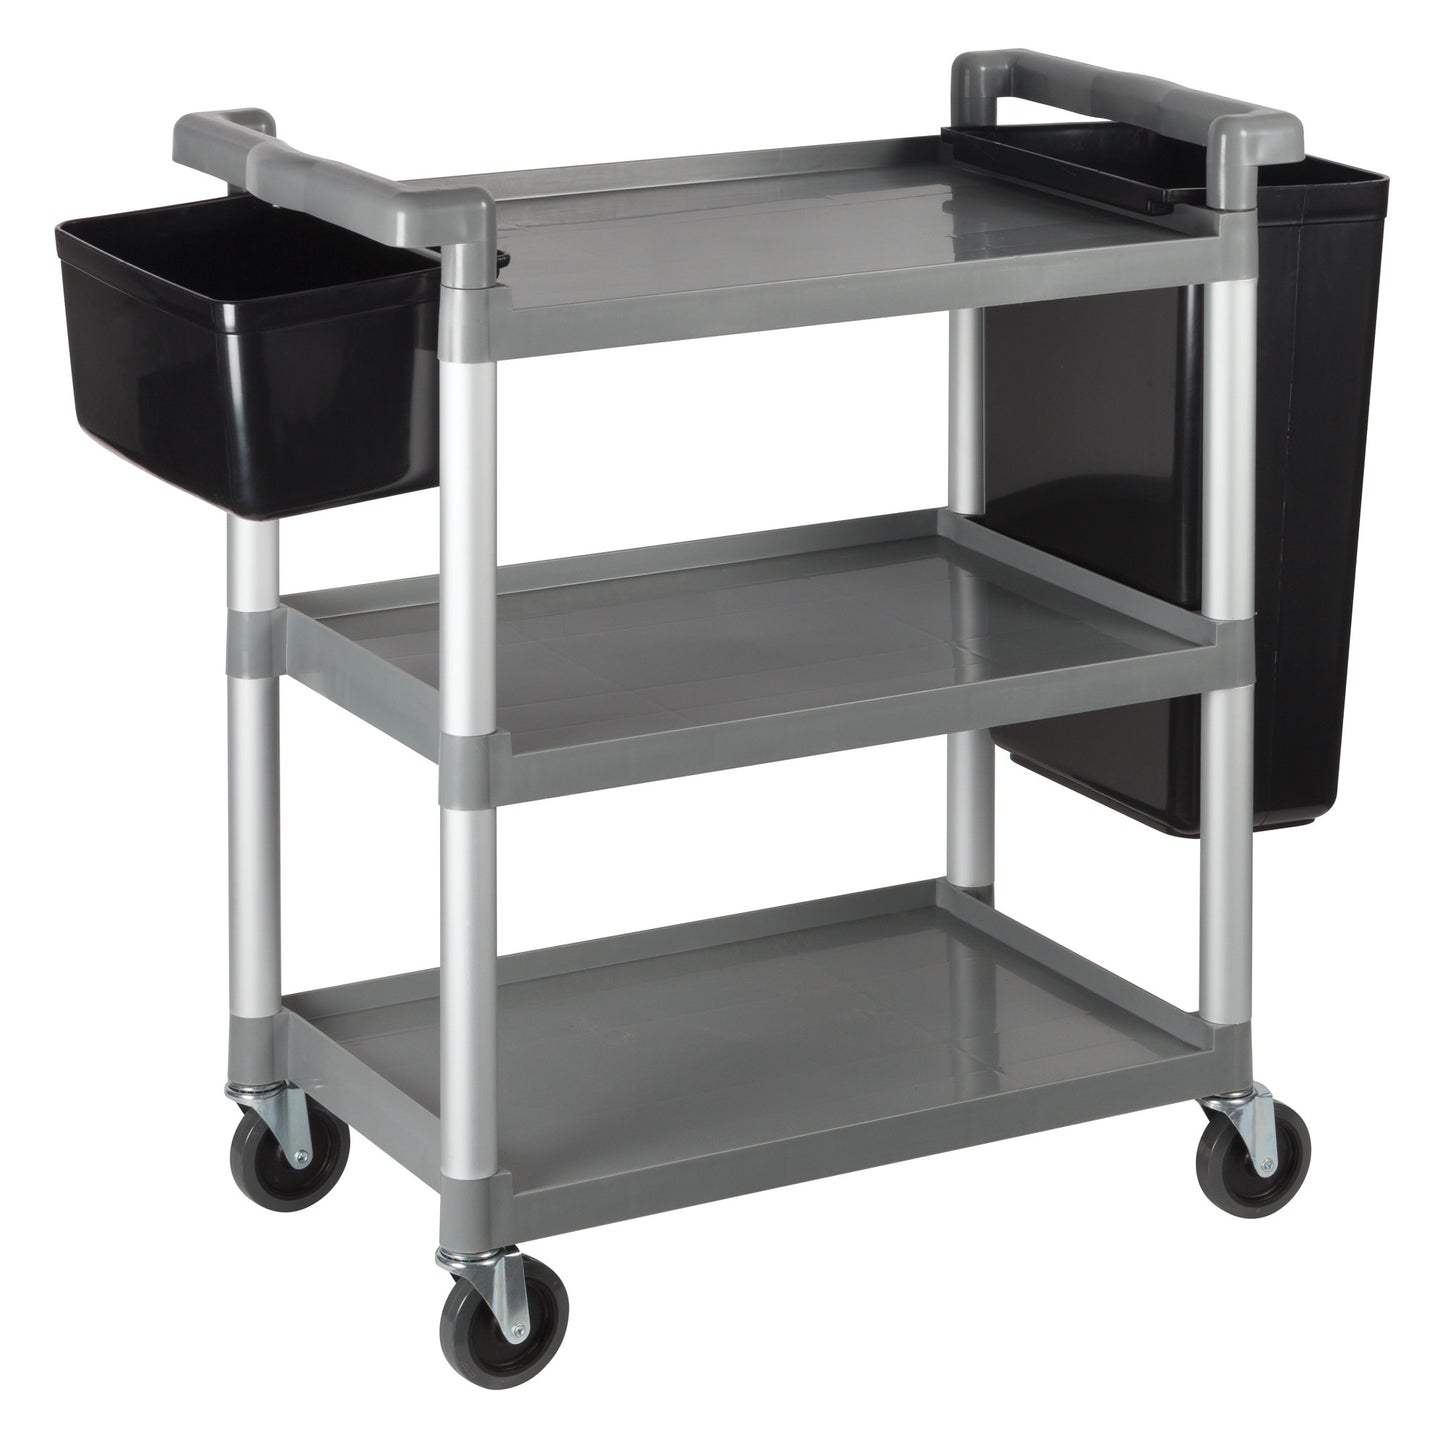 UC-2415G - 3-Tier Utility Carts with Brakes - Gray, 32L x 16-1/8W x 36-3/4H